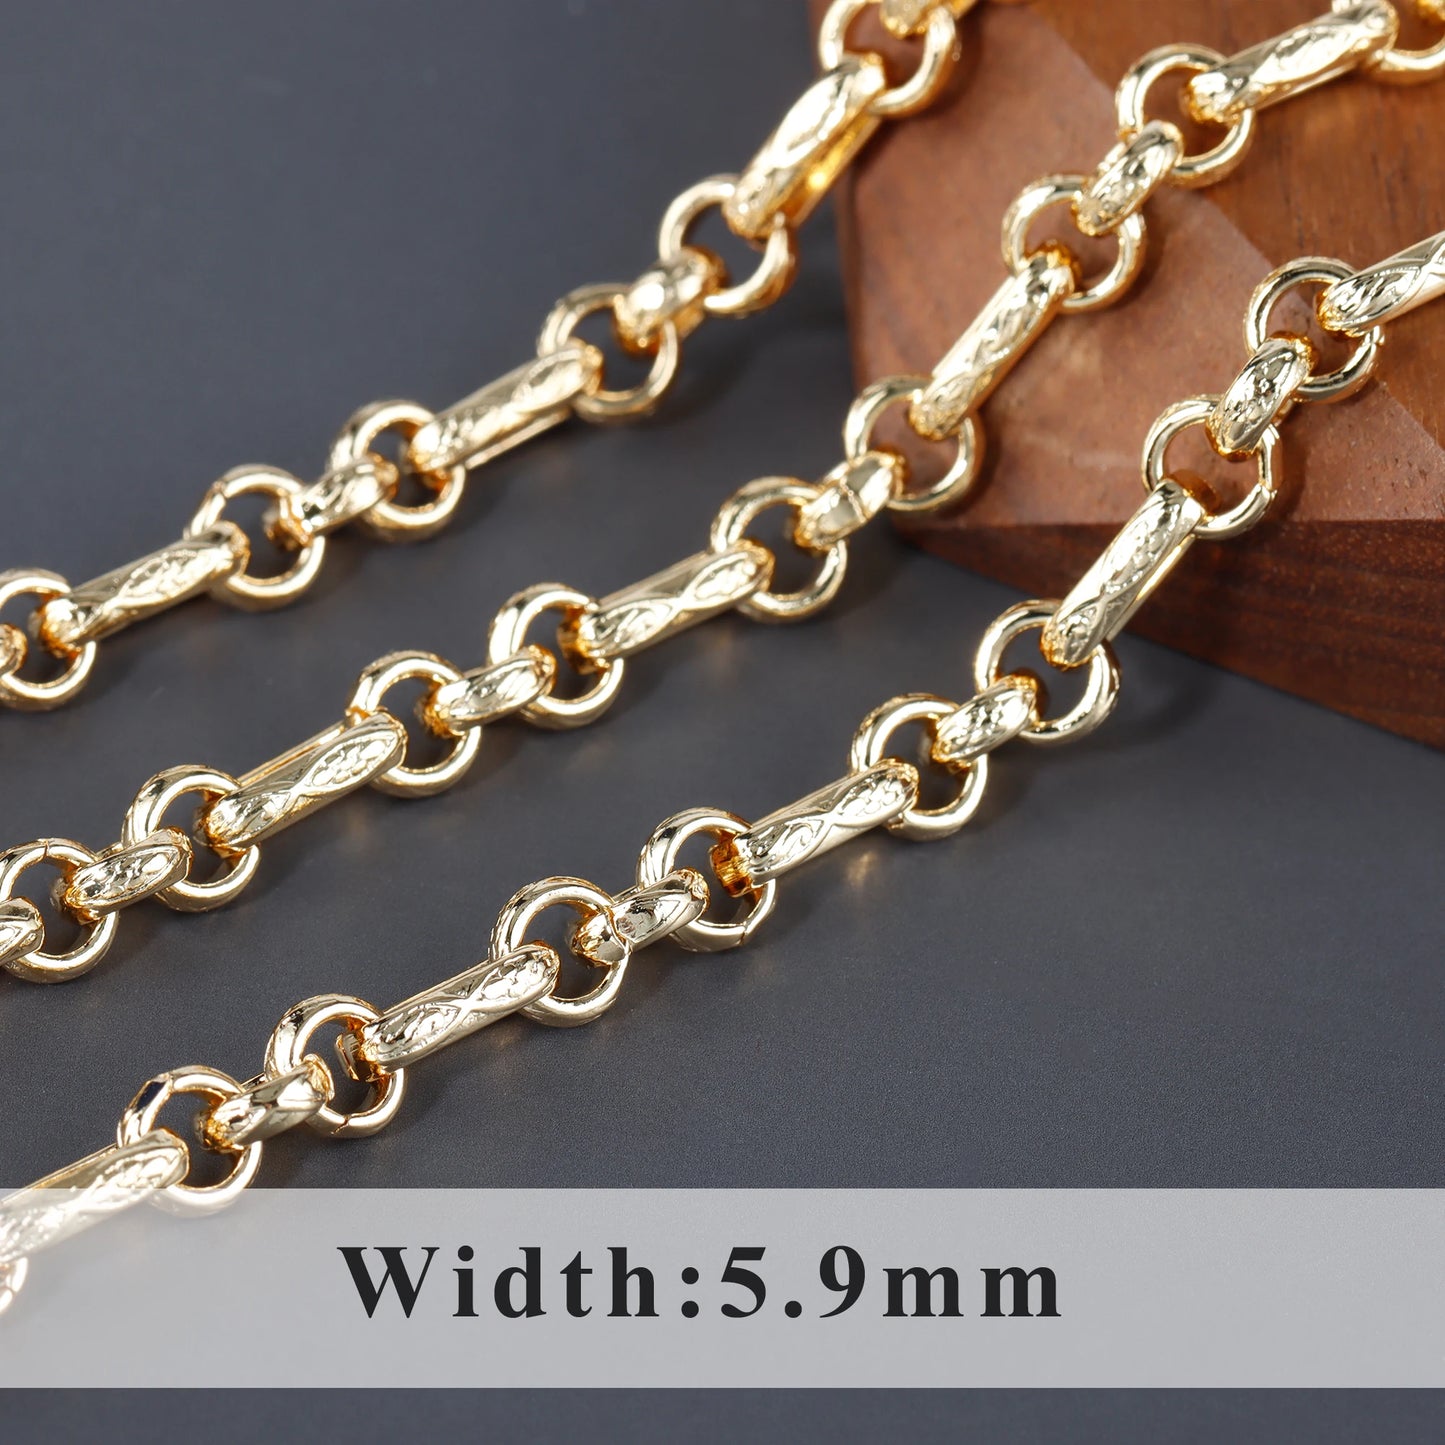 GUFEATHER C191,diy chain,pass REACH,nickel free,18k gold plated,copper metal,charms,diy bracelet necklace,jewelry making,1m/lot